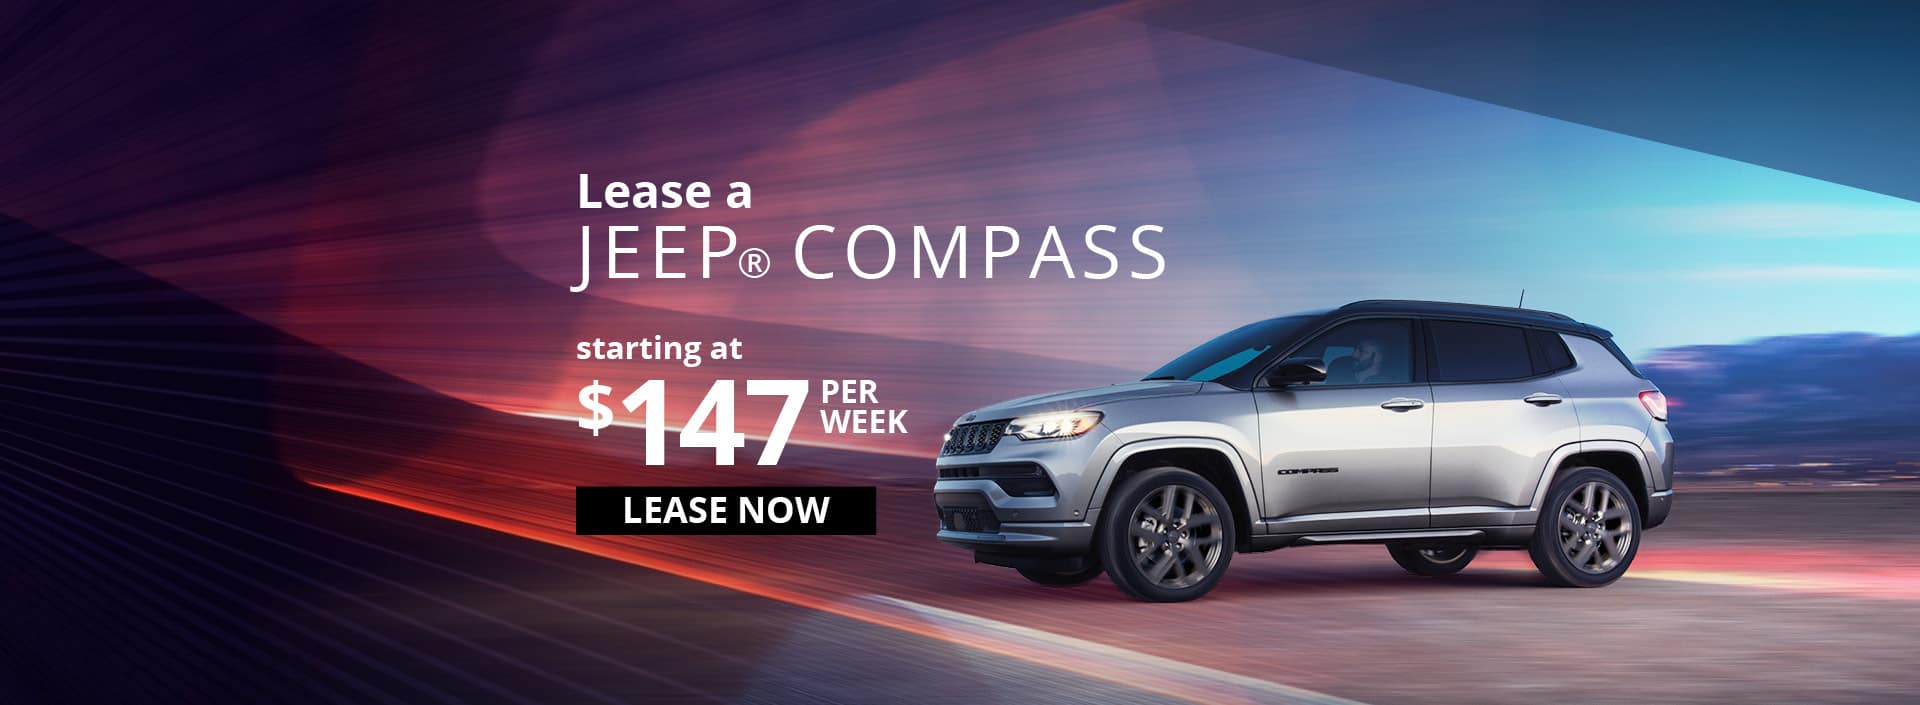 Lease a Jeep Compass